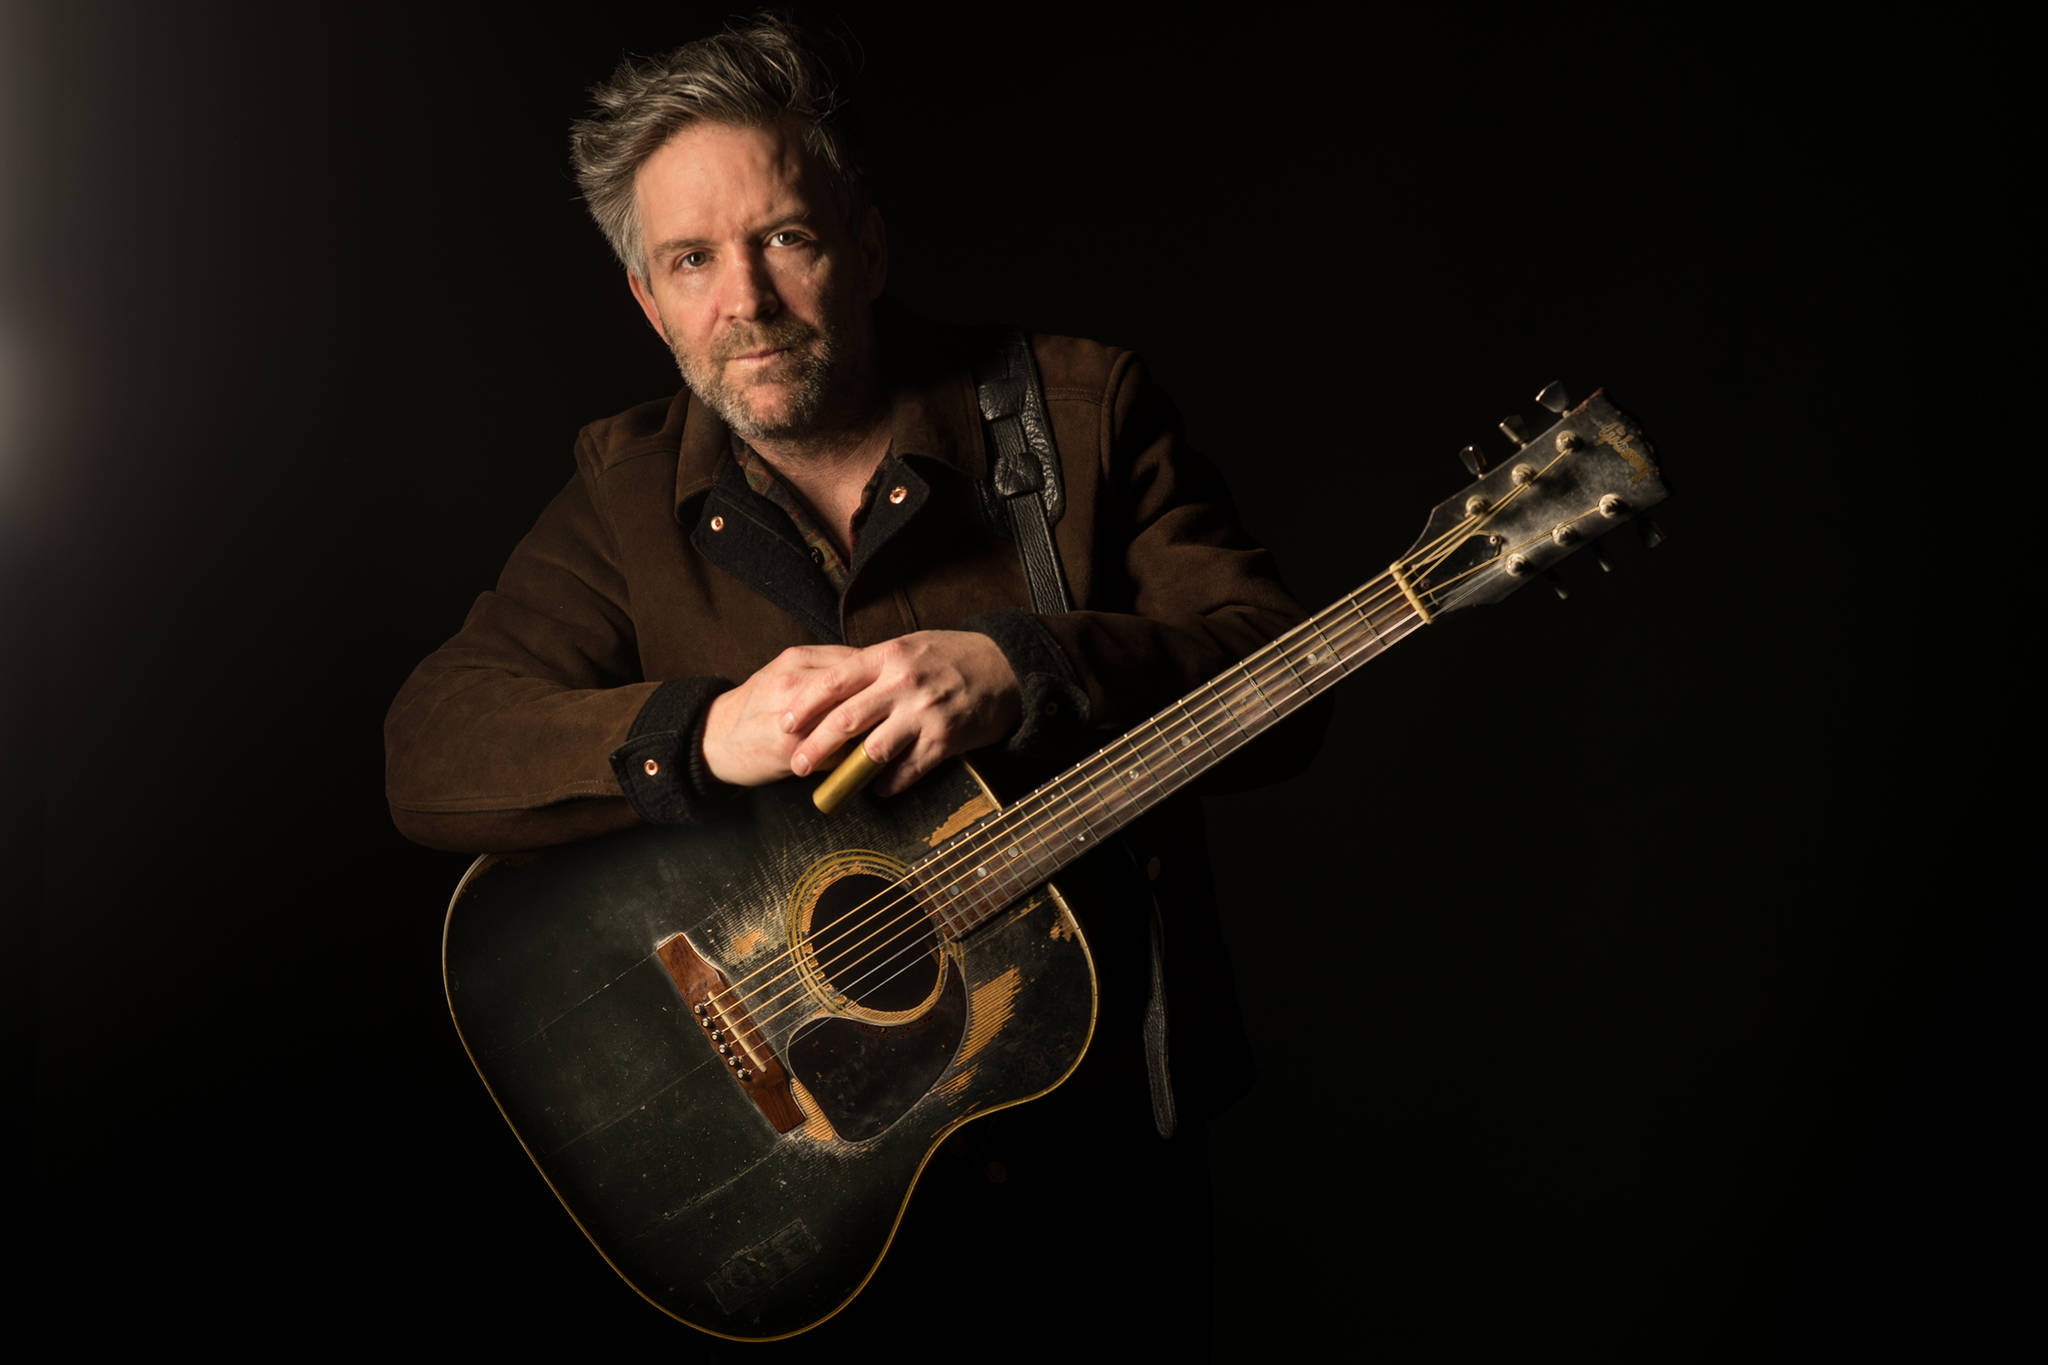 Tim Easton is a Nashville-based singer-songwriter, but he’s been performing in Southeast Alaska for years. Wednesday, April 3, he’ll play a show at the Gold Town Theater. (Courtesy Photo | For Tim Easton)